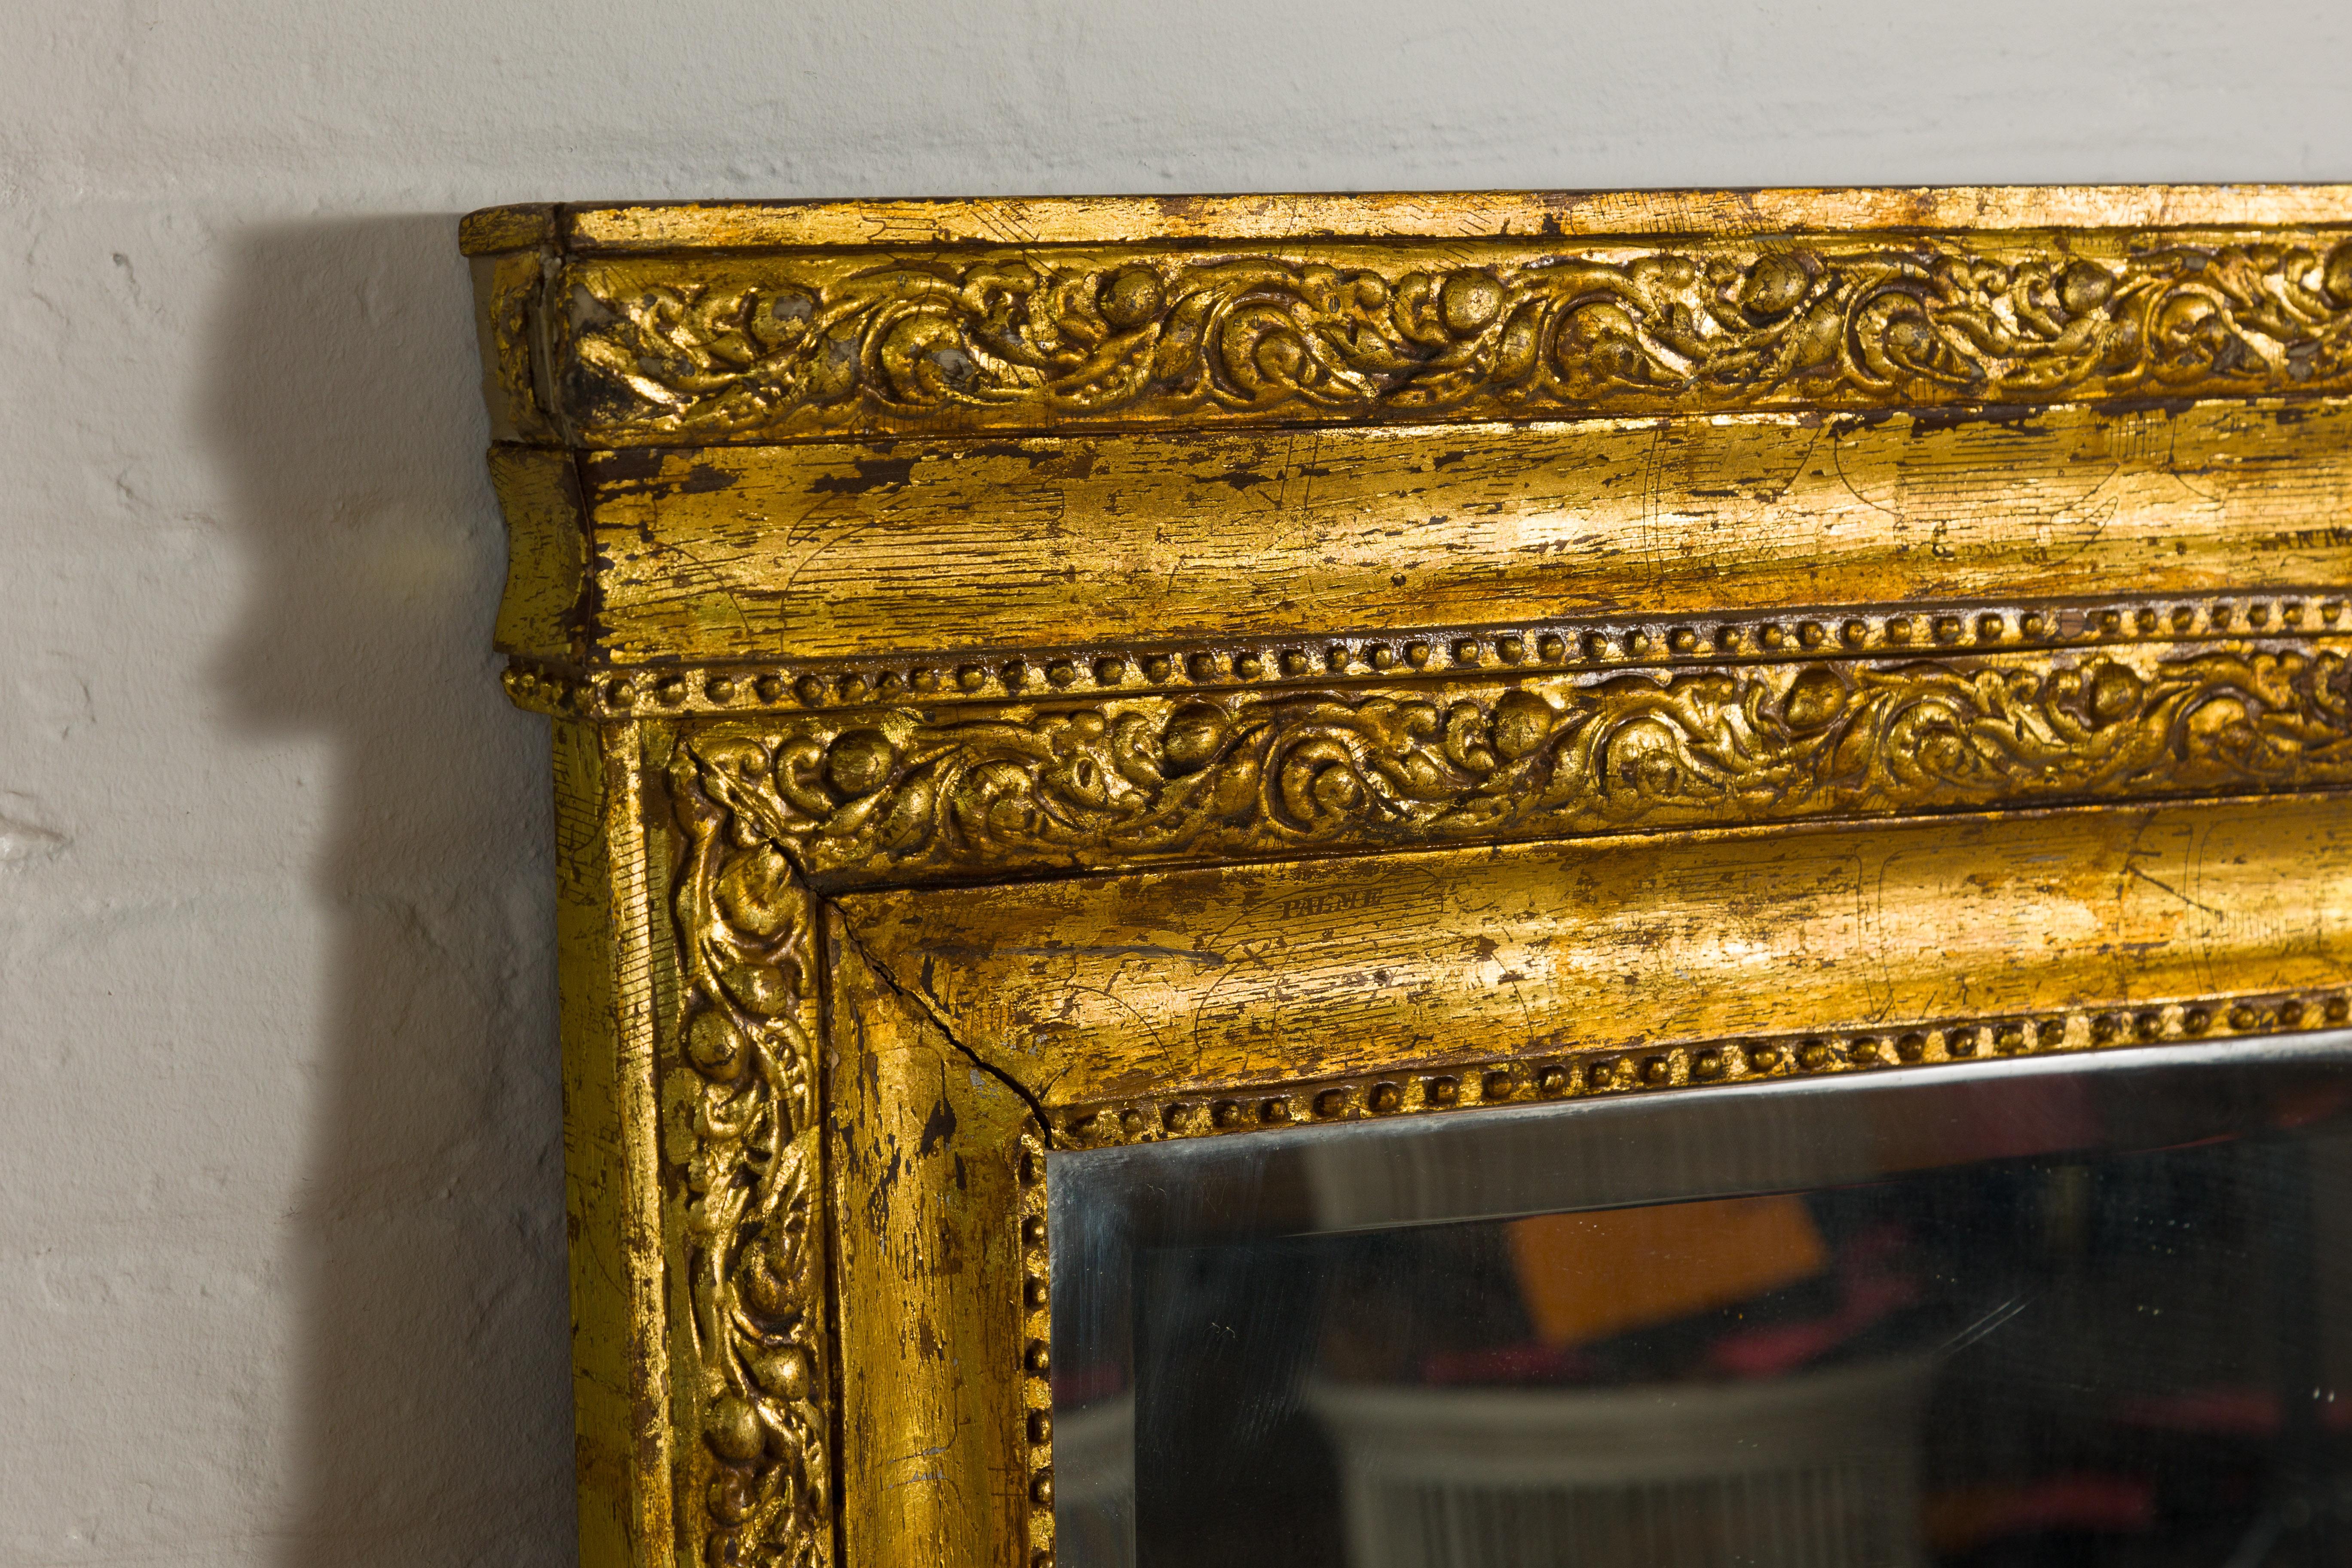 Dutch Colonial Vintage Giltwood Trumeau Mirror with Carved Scrollwork Motifs For Sale 4